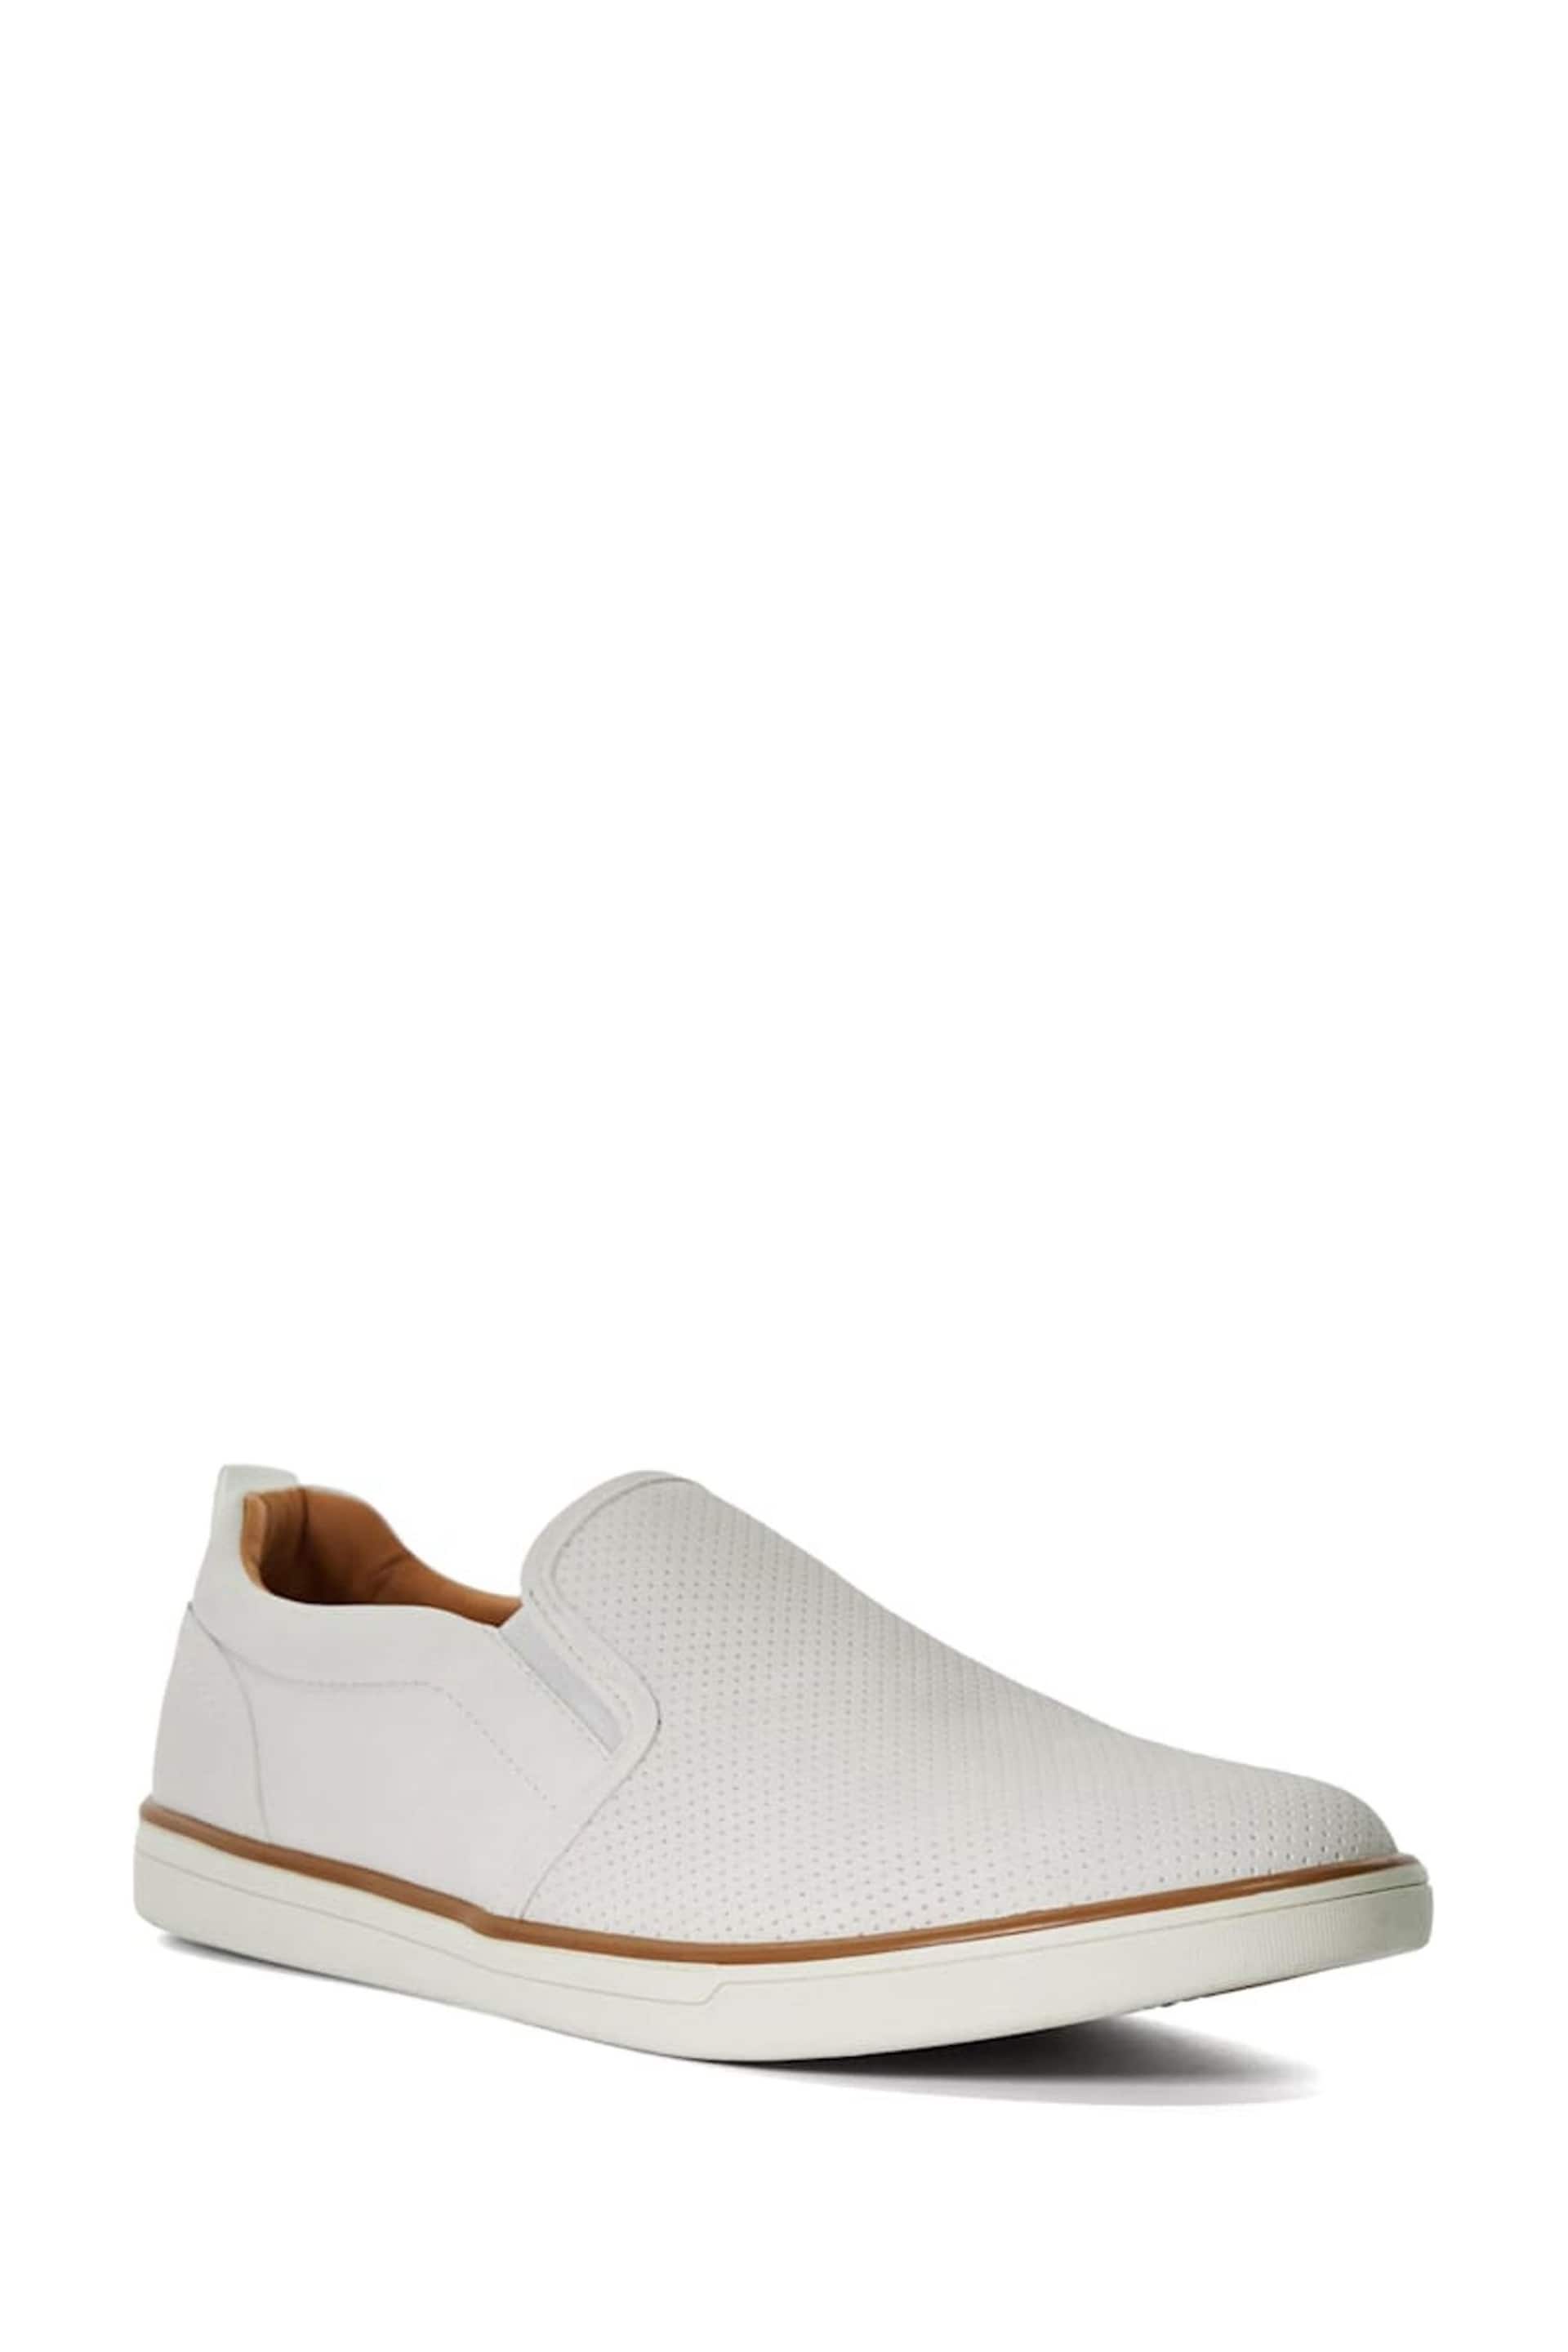 Dune London White Totals Perforated Slip-On Trainers - Image 4 of 6